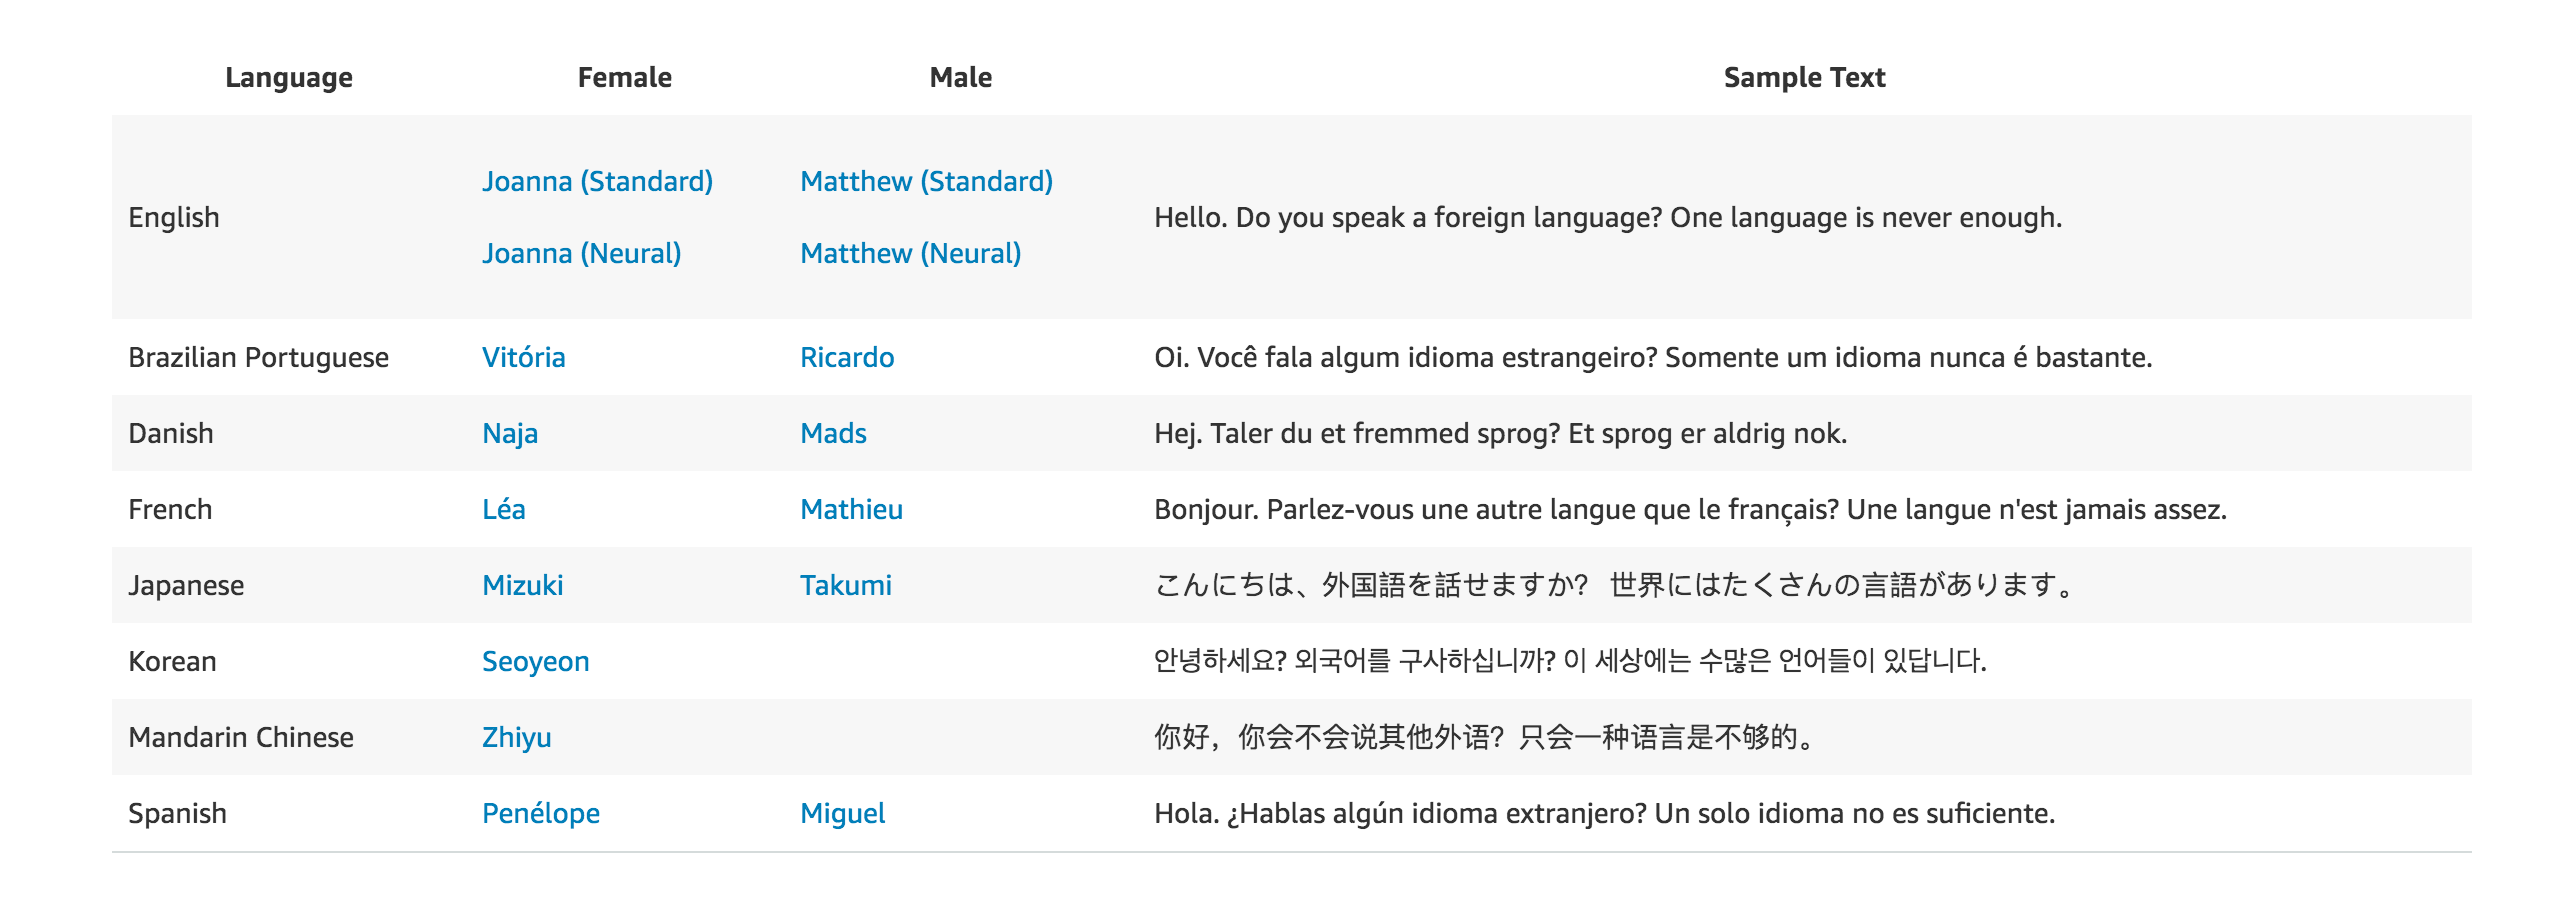 Languages that are included in Amazon Polly